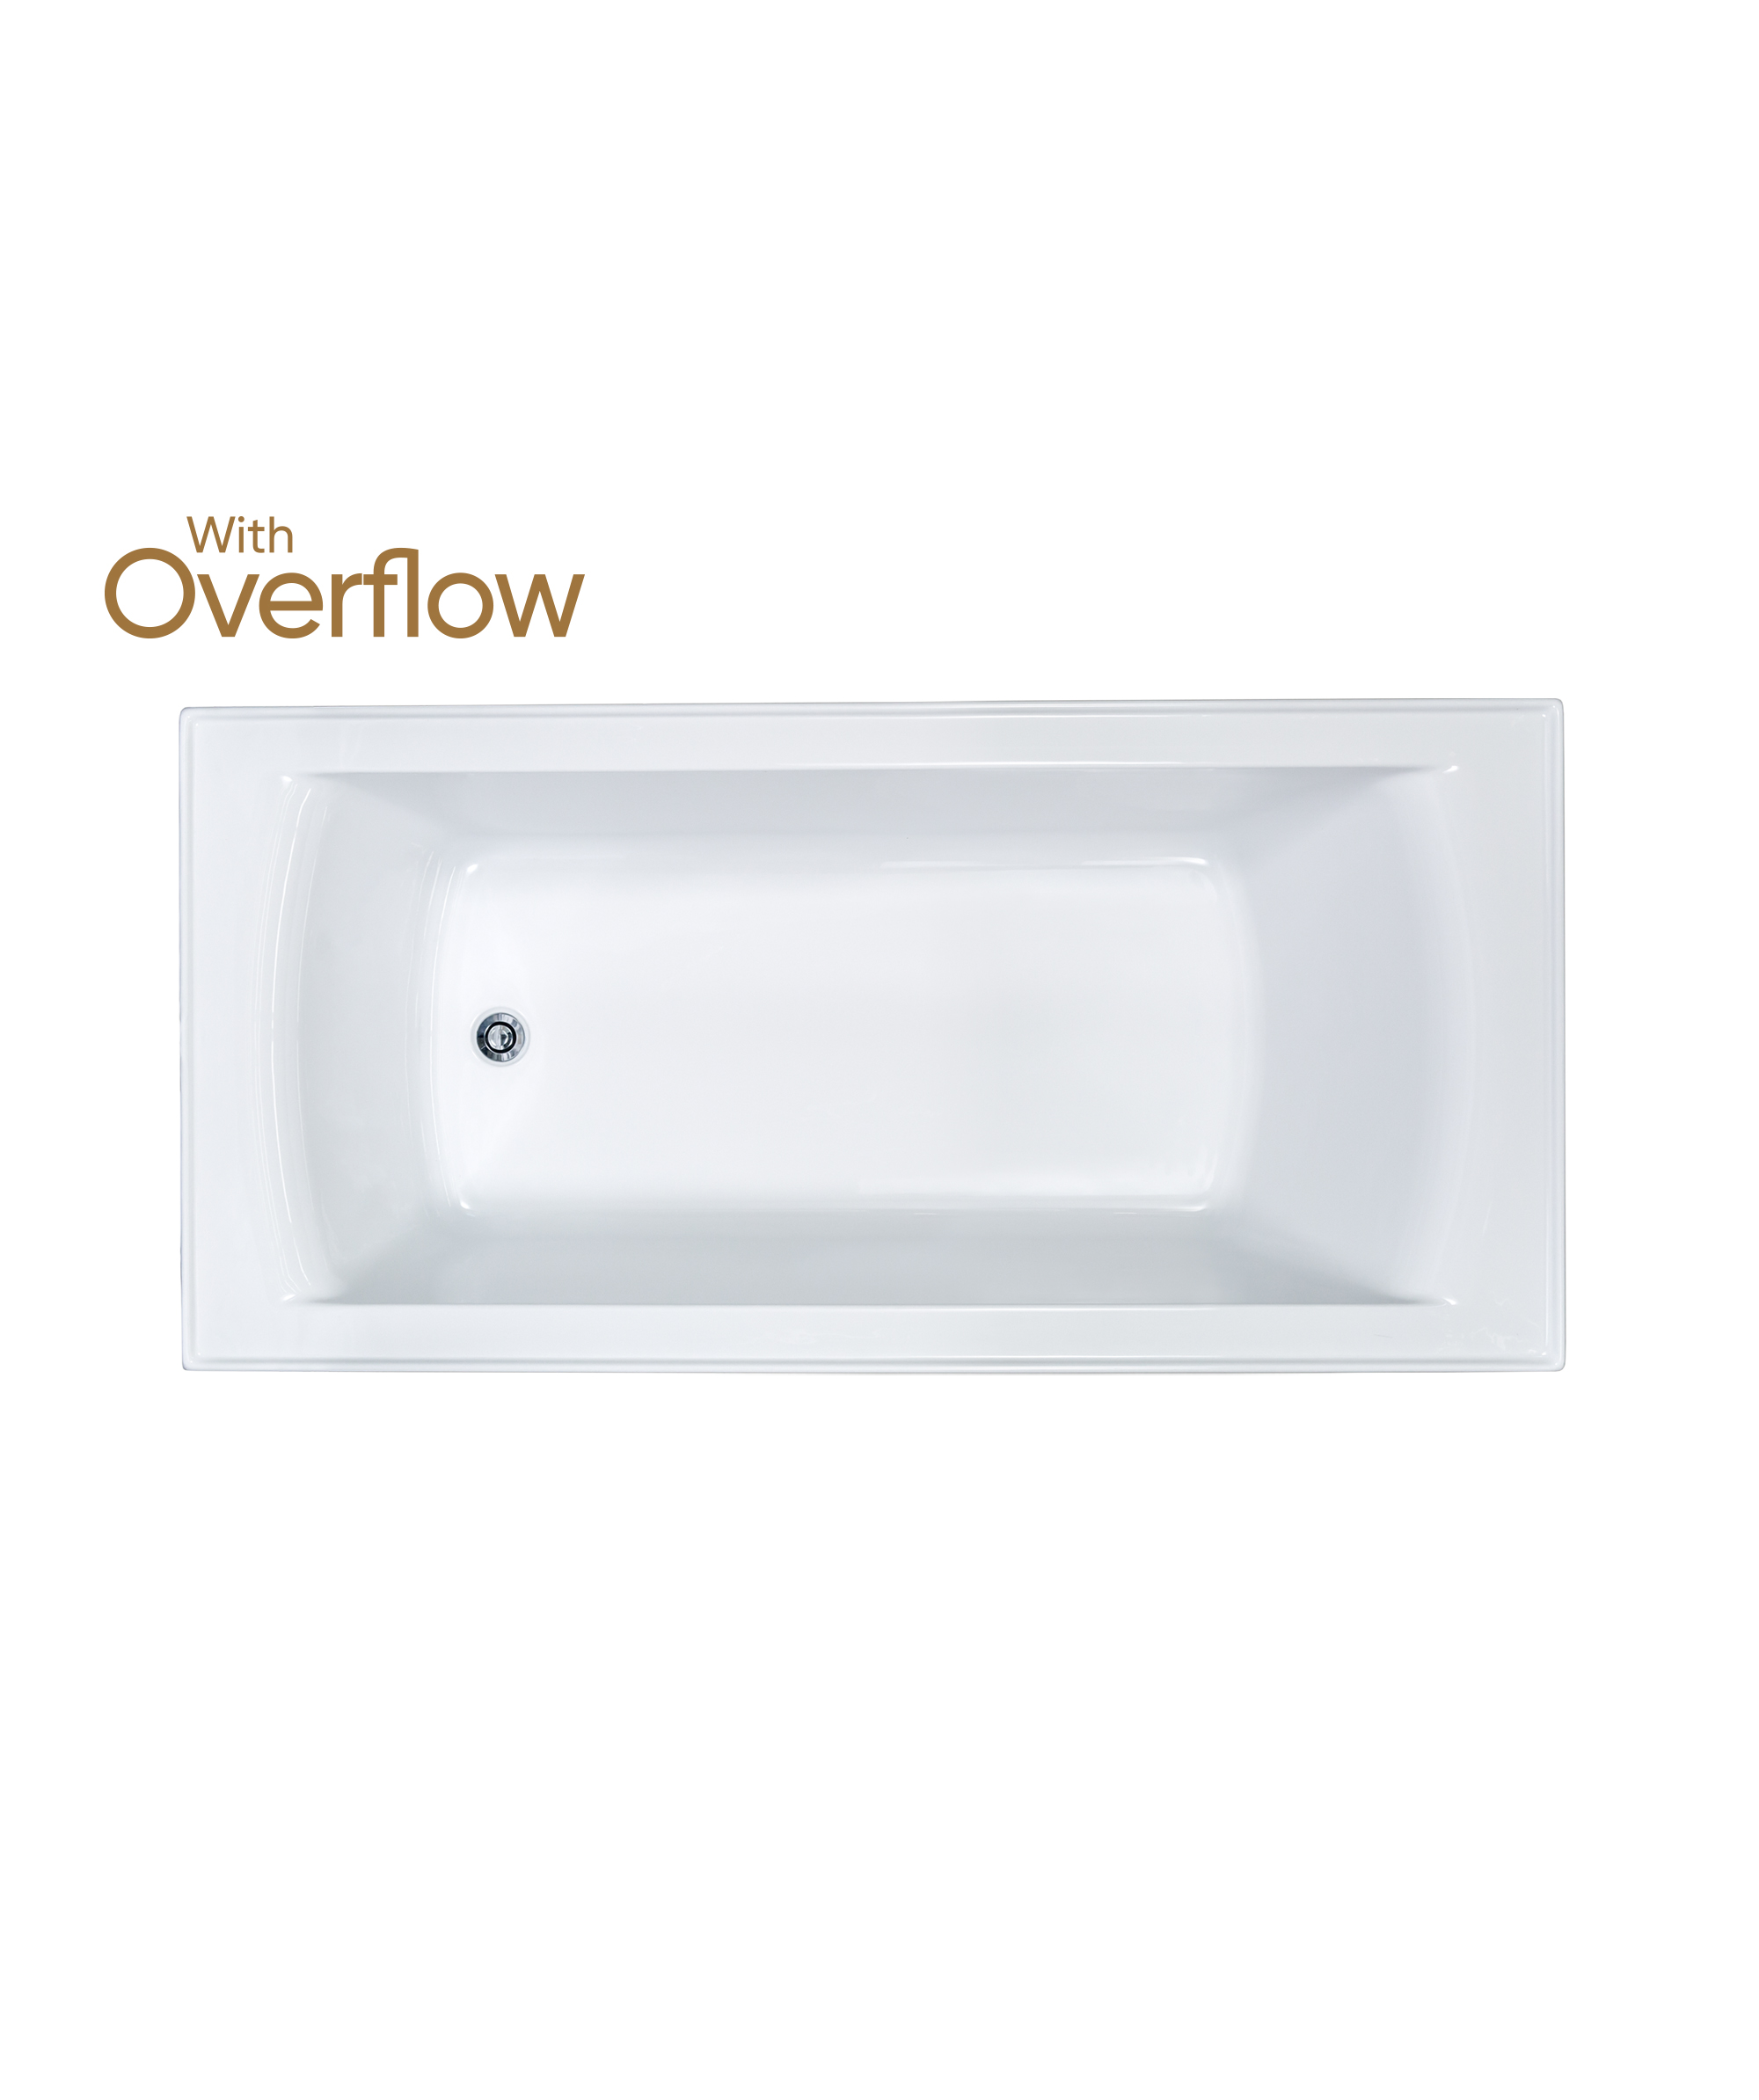 Syros 103 (Select) inset bath - with Overflow Basic and Plug+Waste